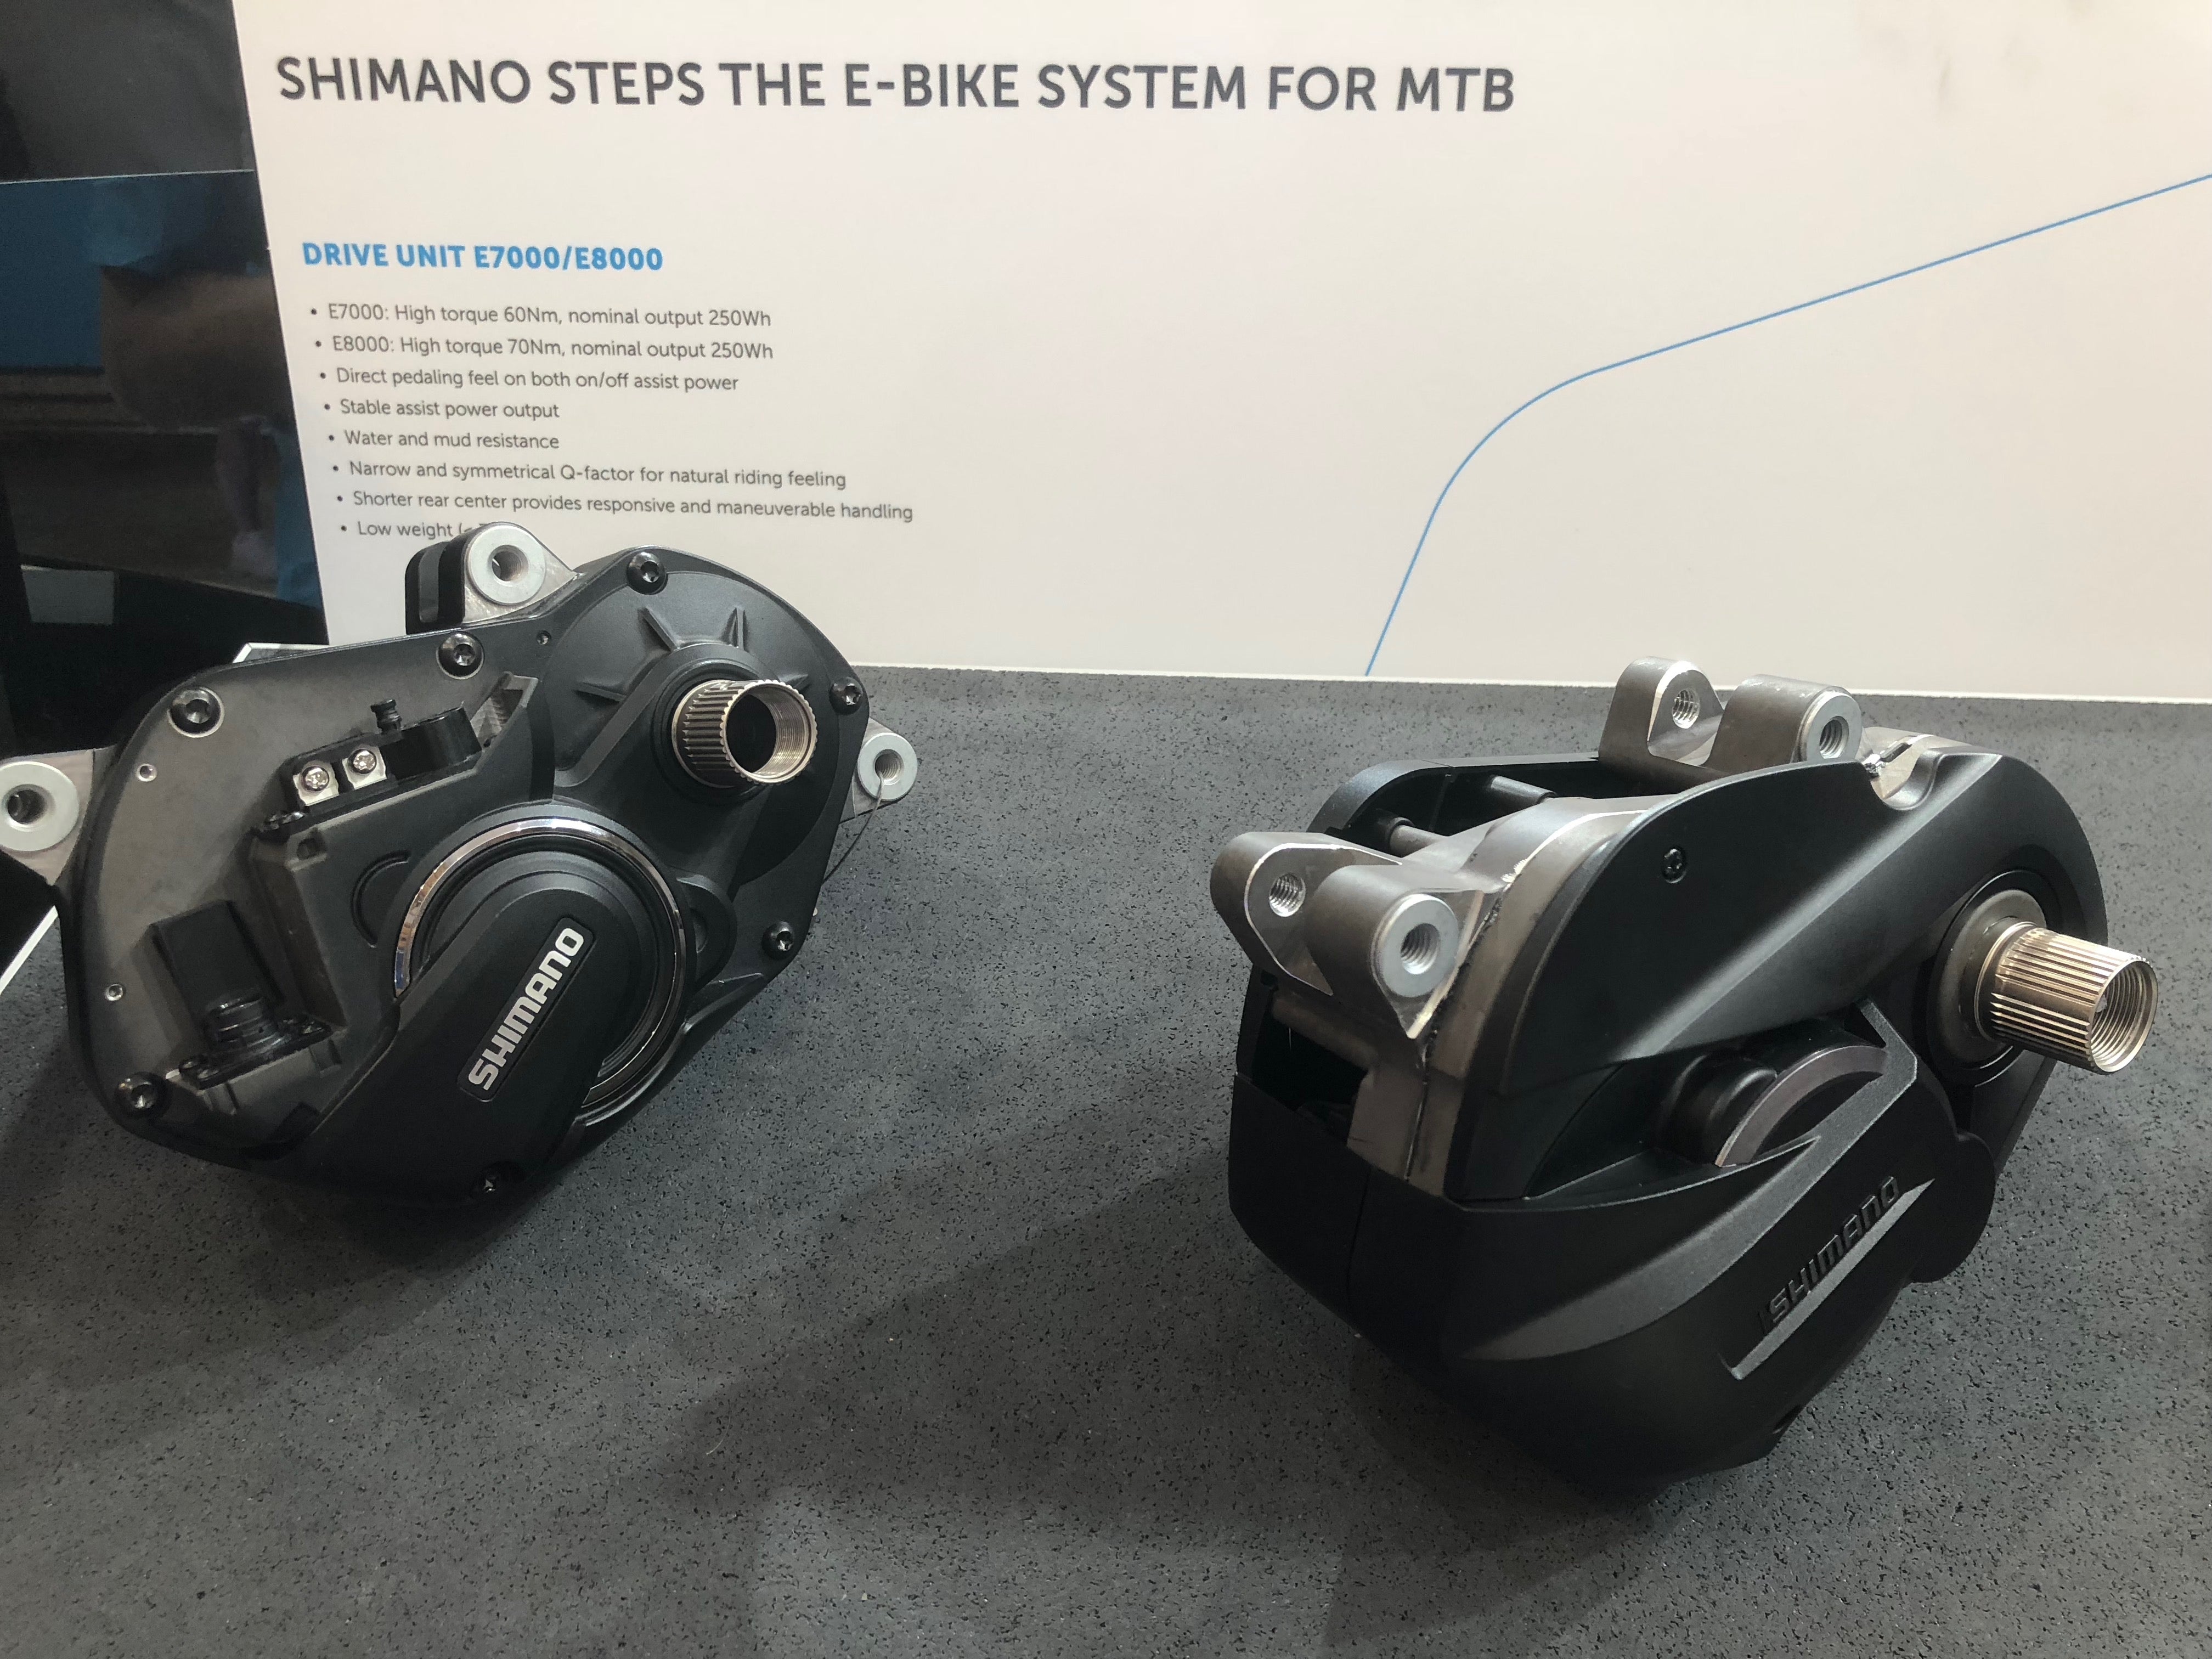 Shimano Launches Two New STEPS Drive Units